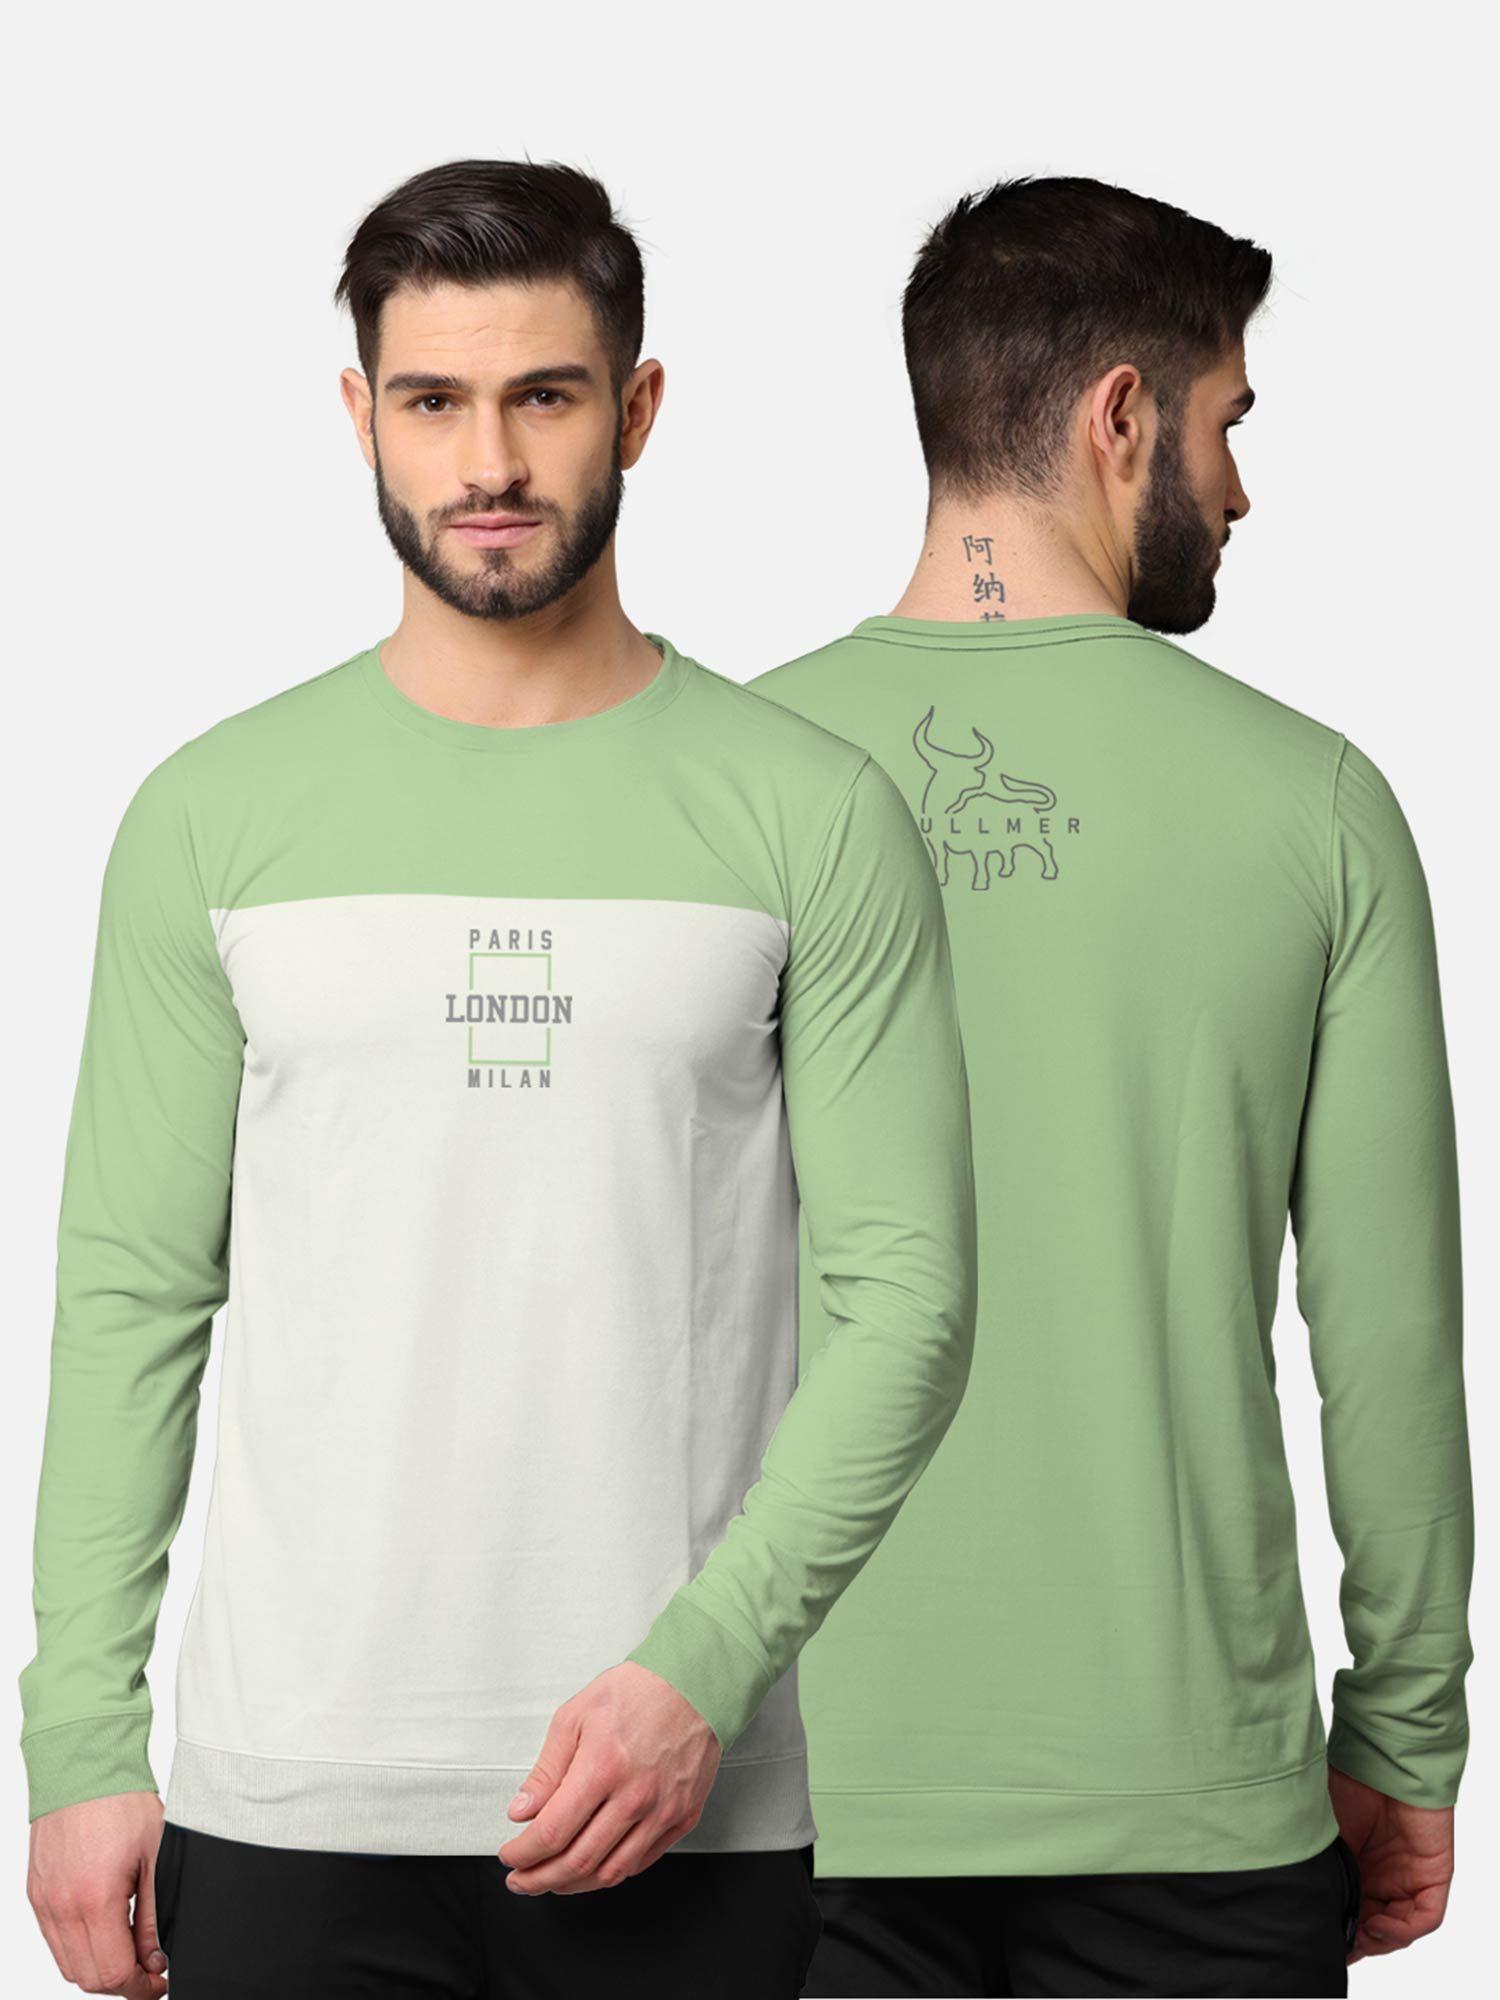 trendy-front-&-back-colorblock-full-sleeve-t-shirt-for-men-green-and-white